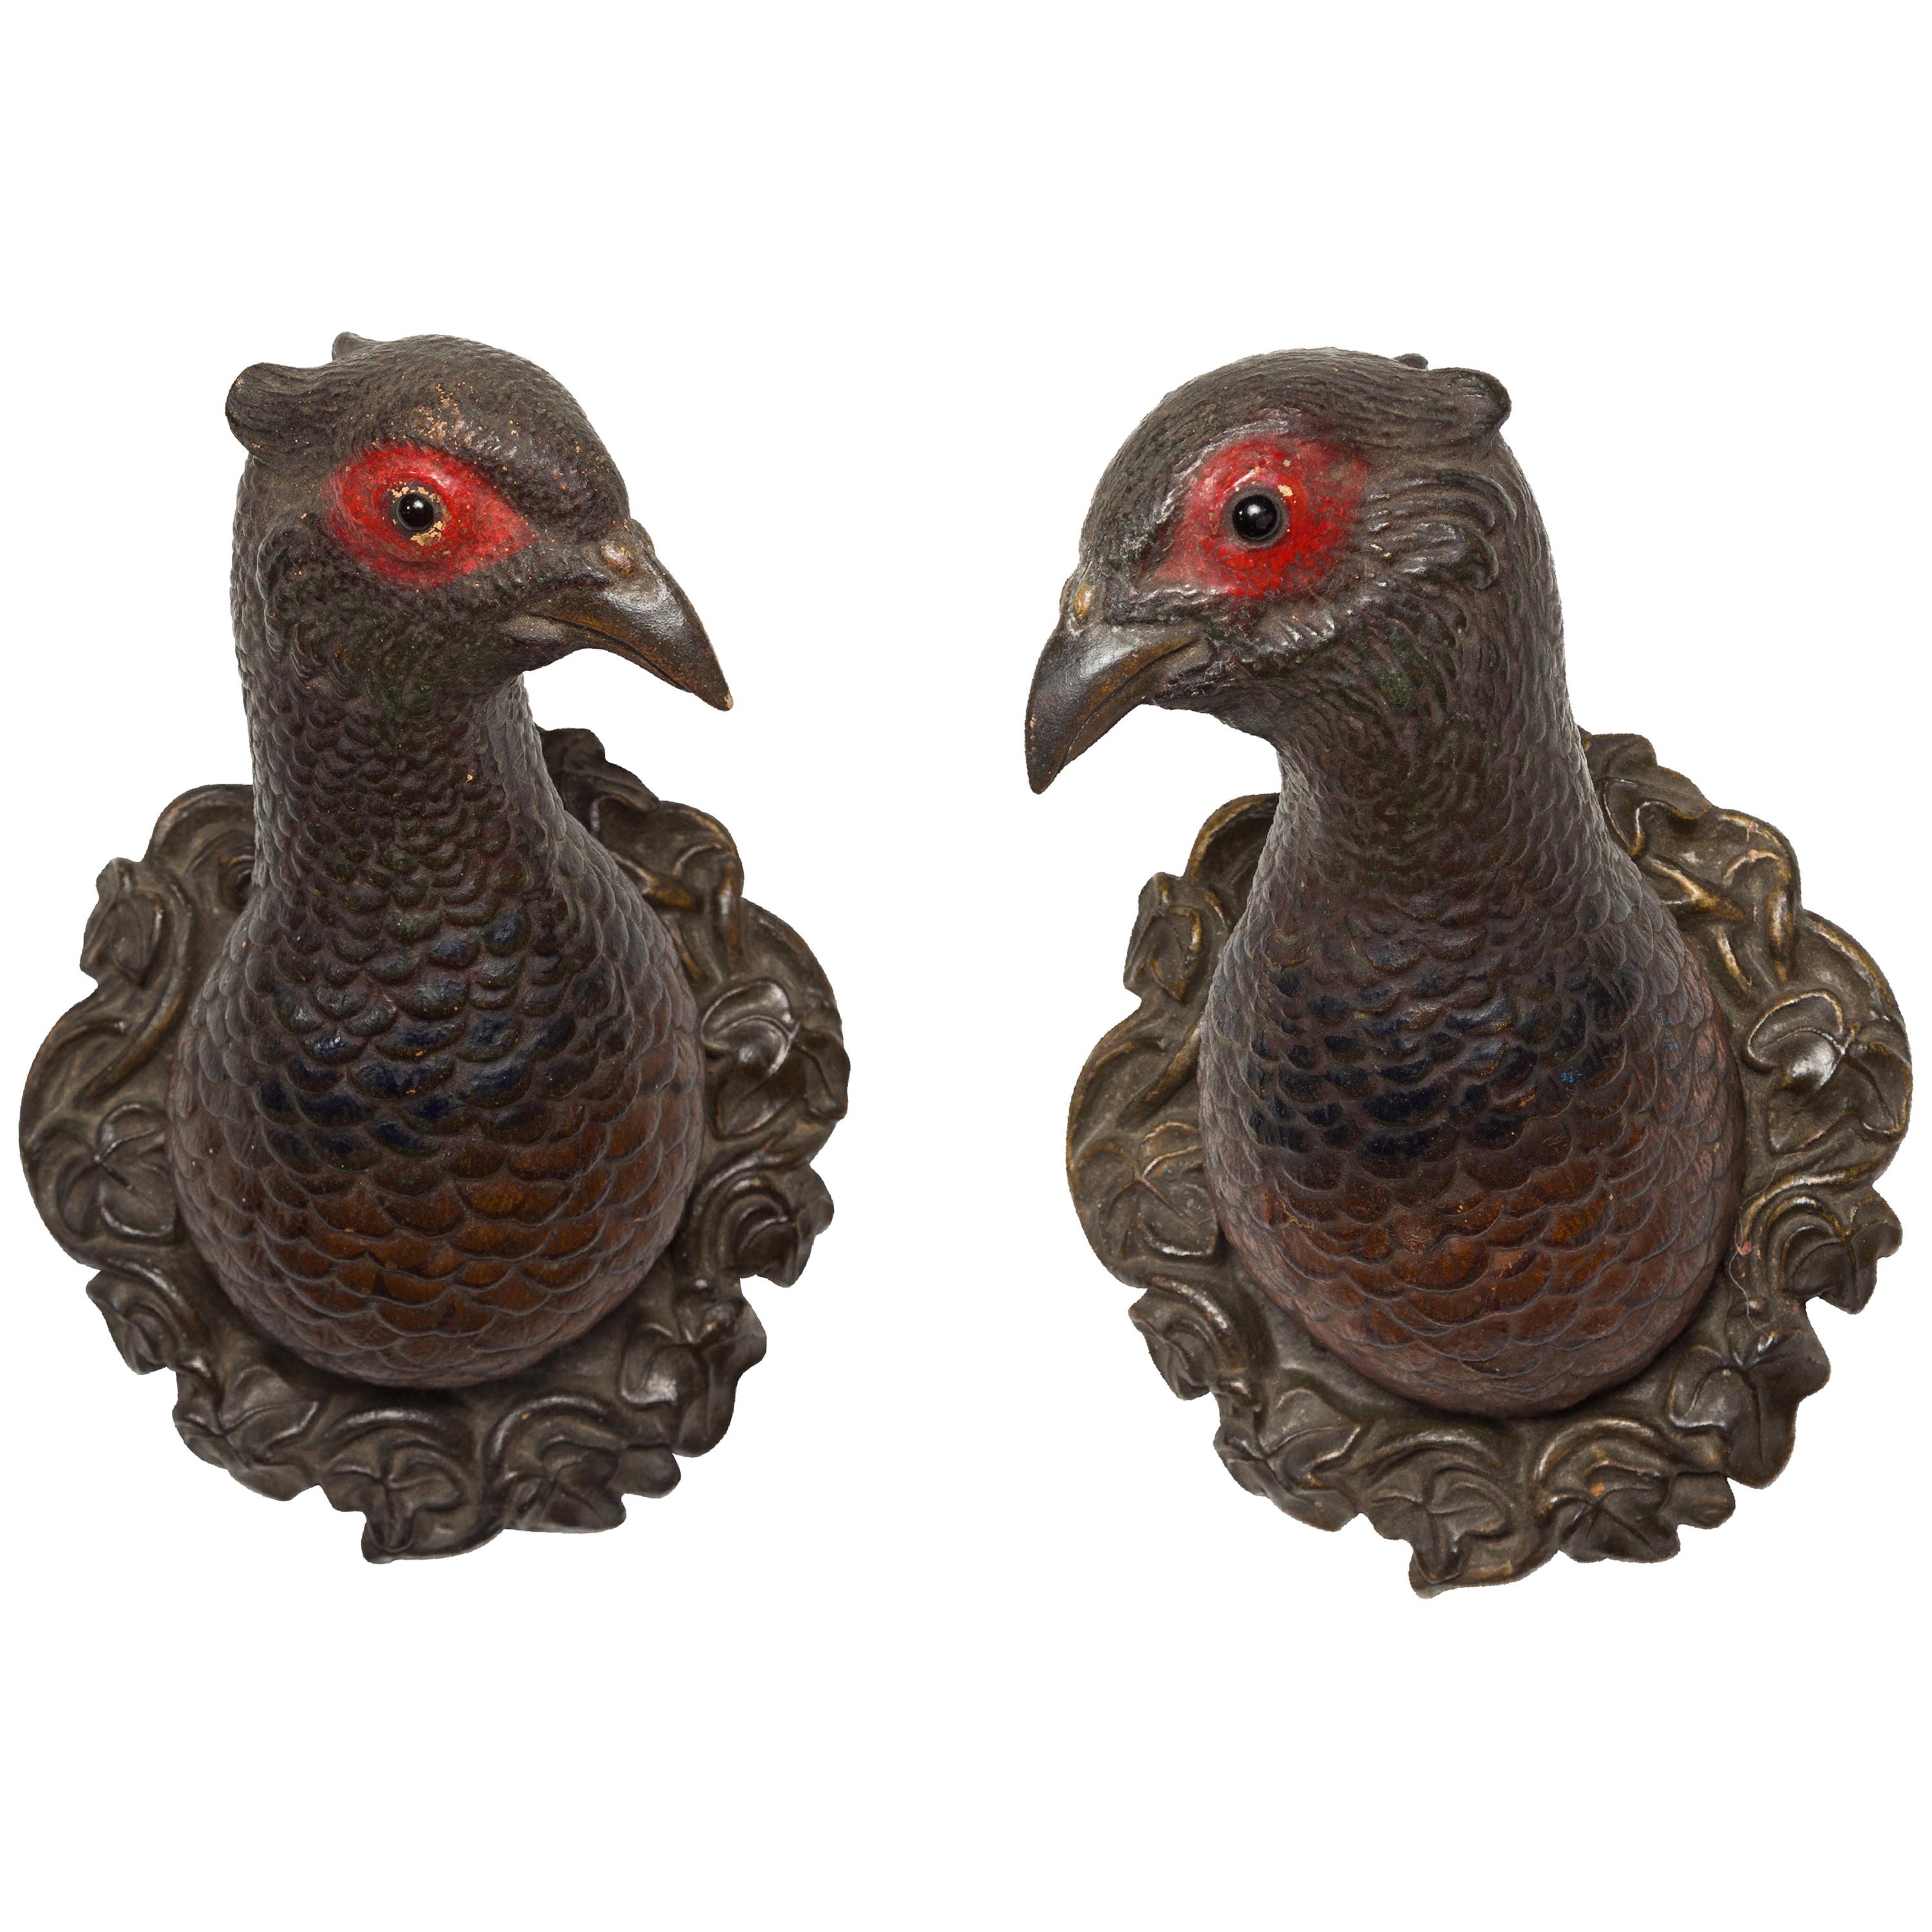 Pair of American 1930s Terracotta Turkey Wall Sculptures with Glass Eyes